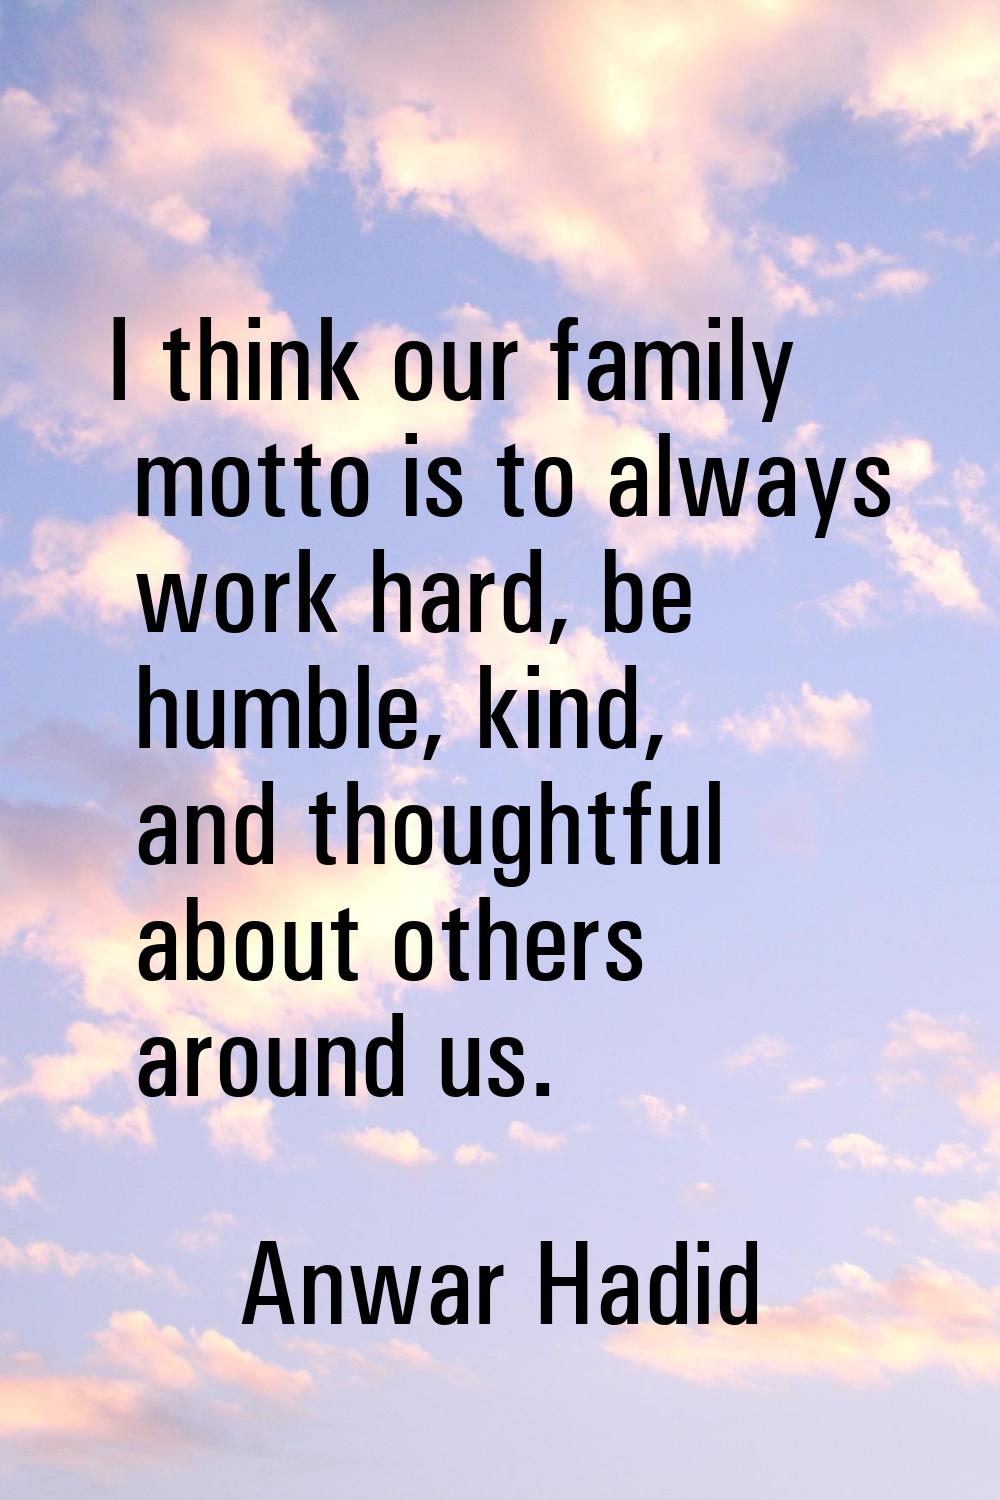 I think our family motto is to always work hard, be humble, kind, and thoughtful about others aroun